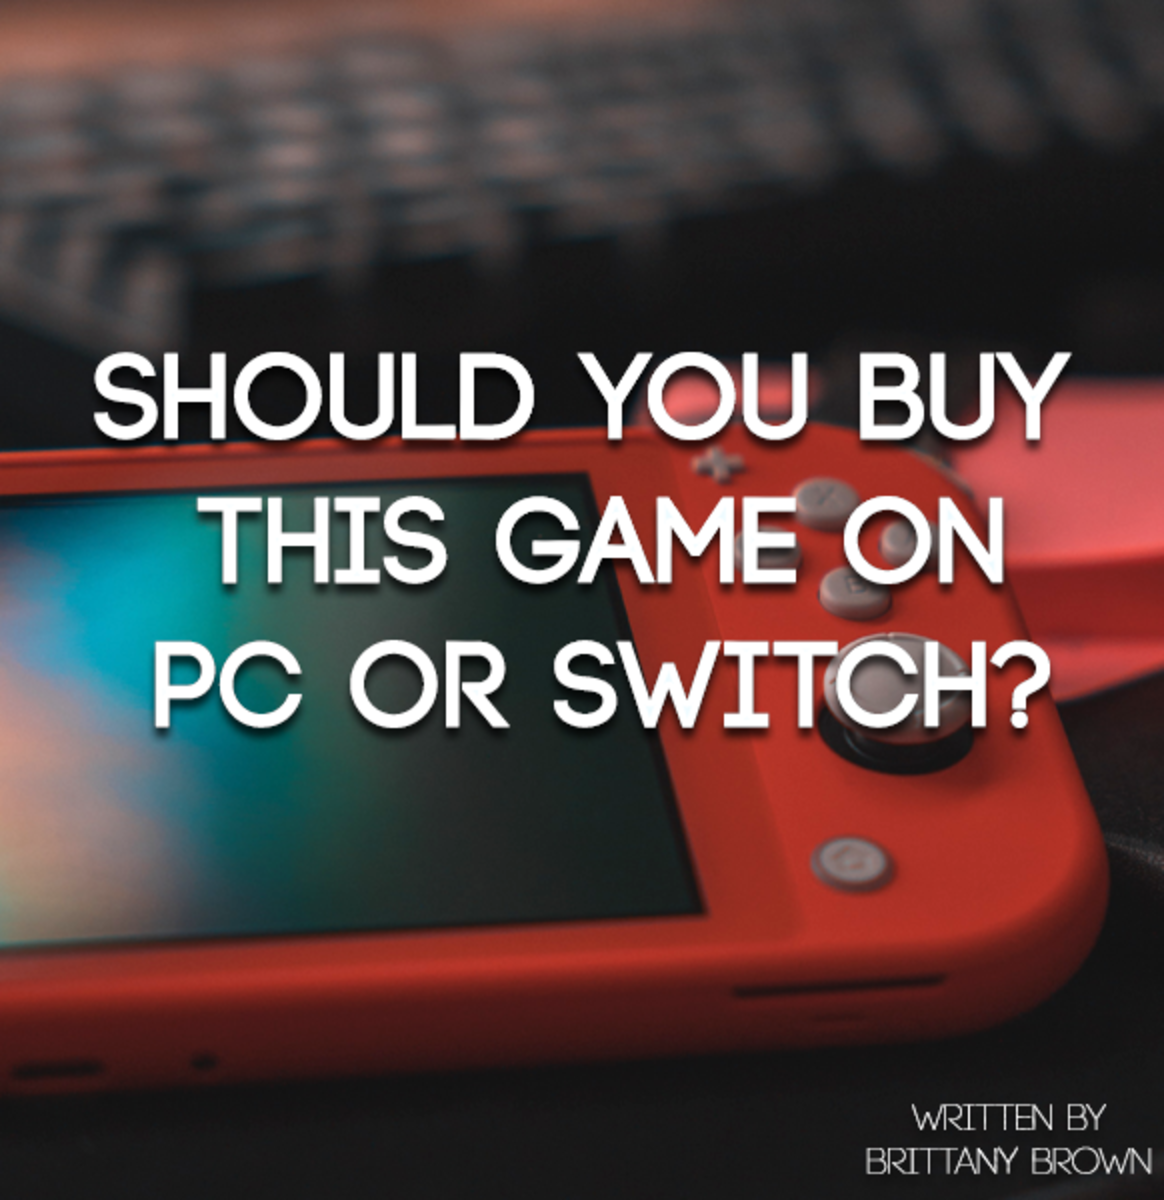 Should You Buy a Game on PC or Switch?